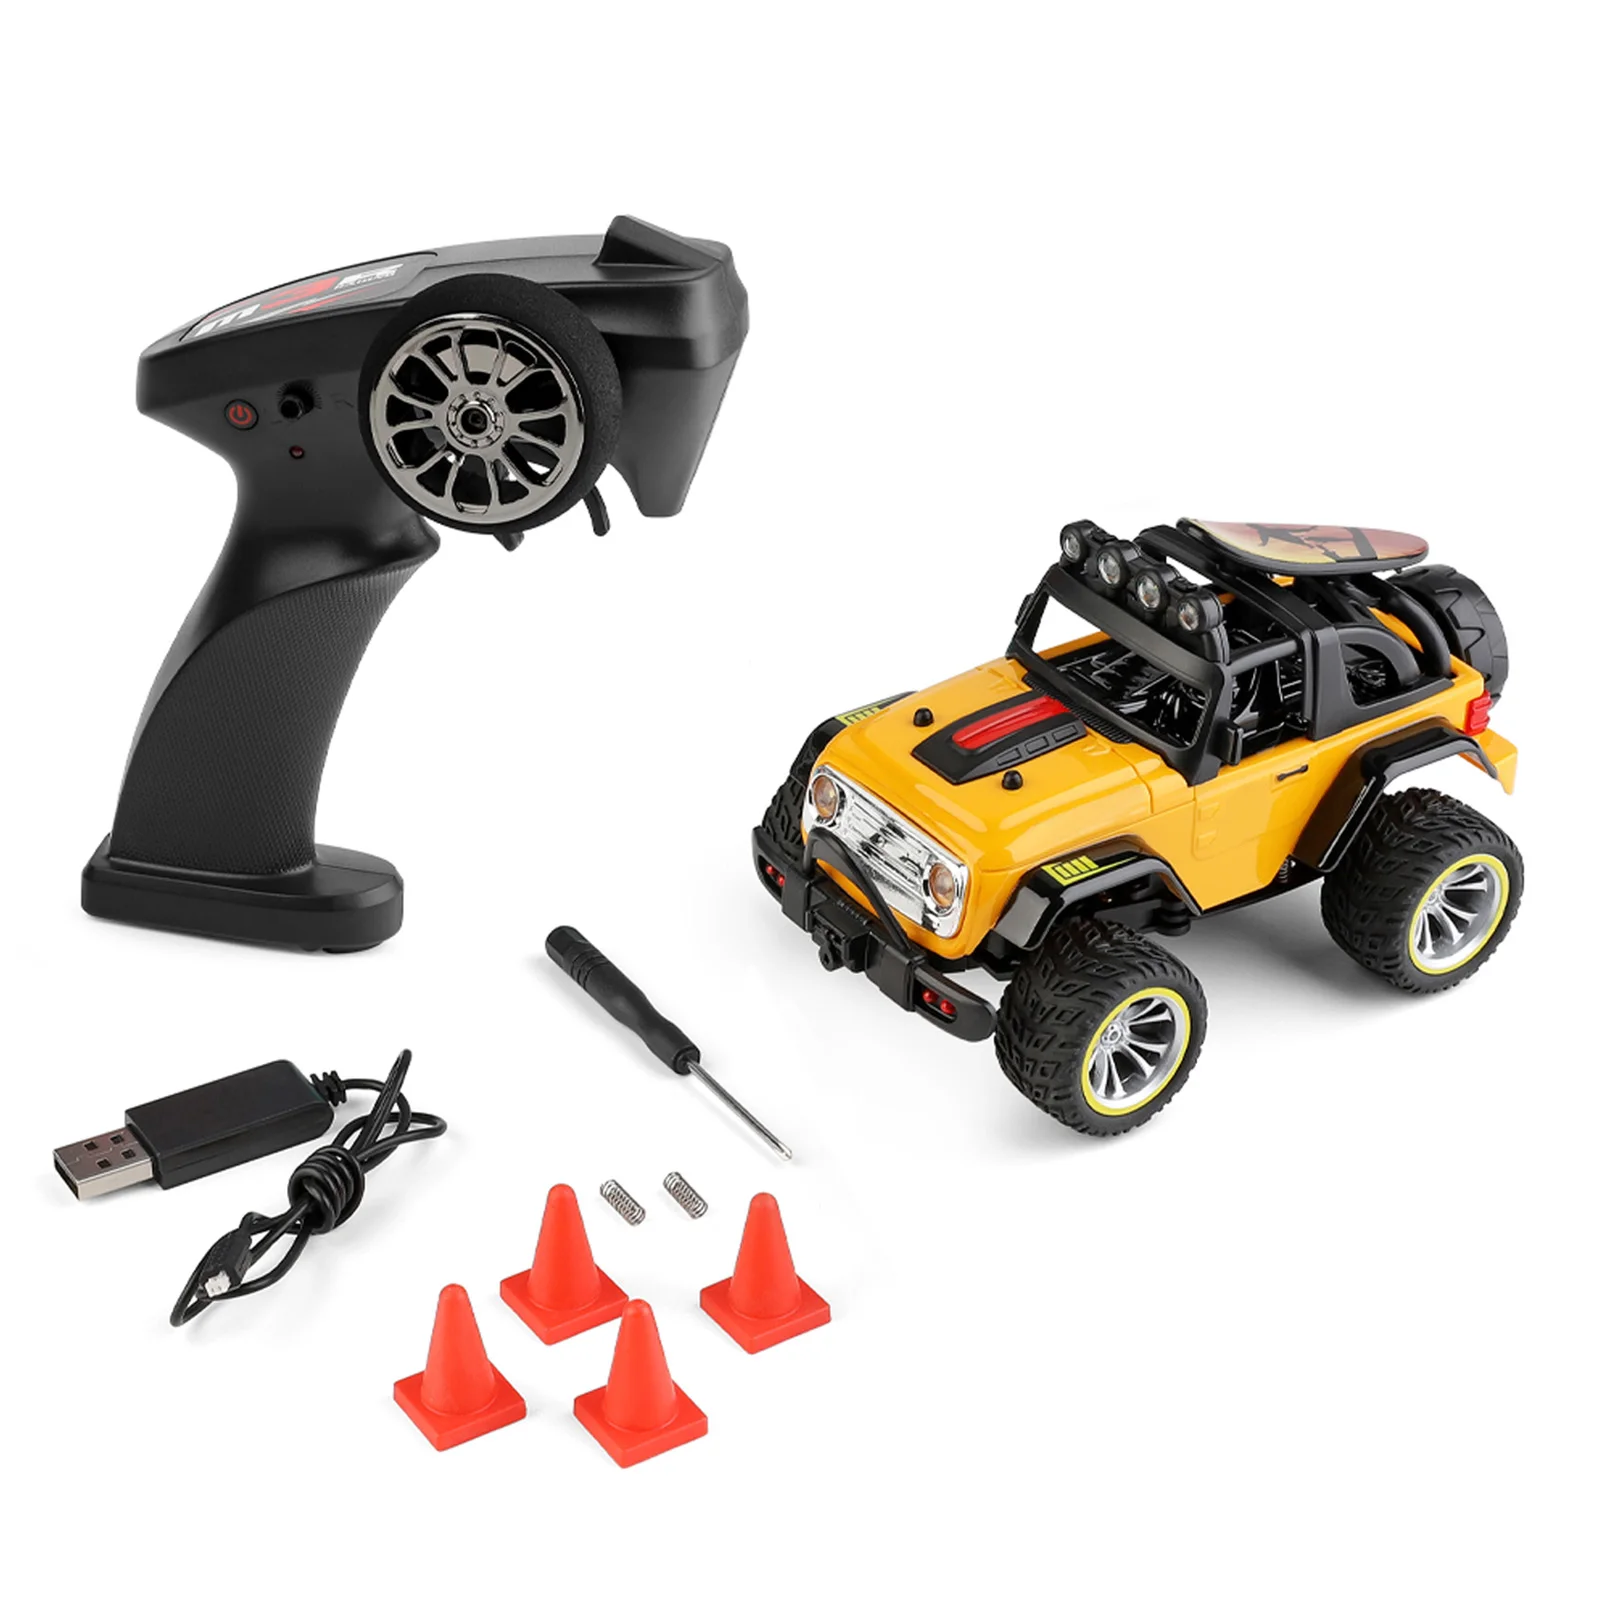 

2022 Original WLtoys 322221 RC Car 2.4GHz Off-Road Car 1/32 Racing Remote Control Truck 25km/h RTR Car toys for Kids Hot, Red / yellow